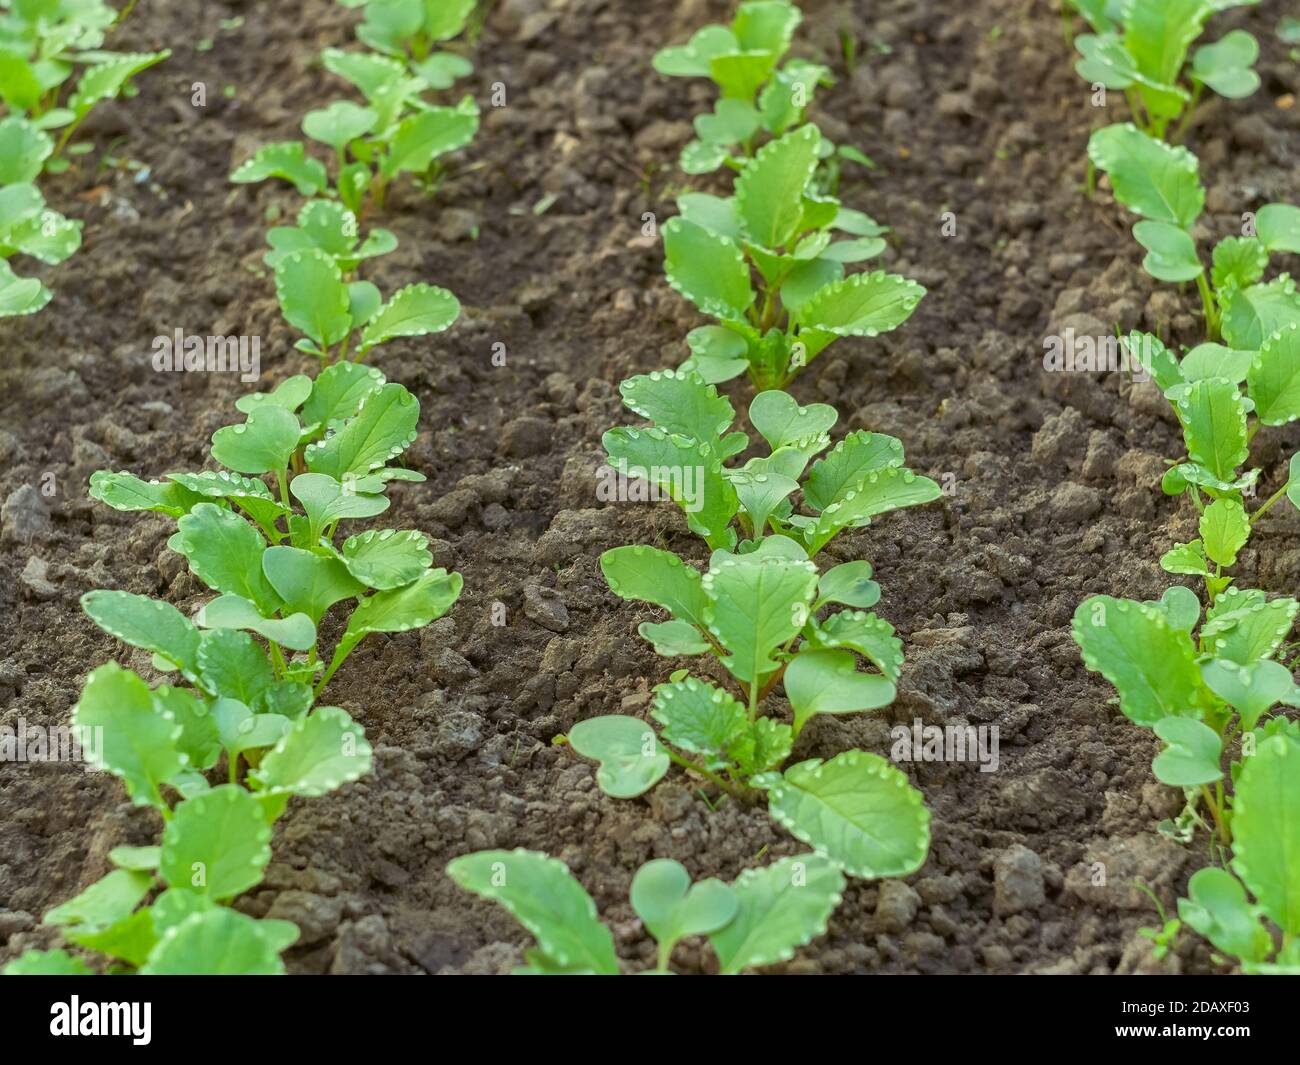 A lot of small radish plants with symmetrically placed water drops on the green leaves, growing in soil in April, springtime gardening, close-up Stock Photo